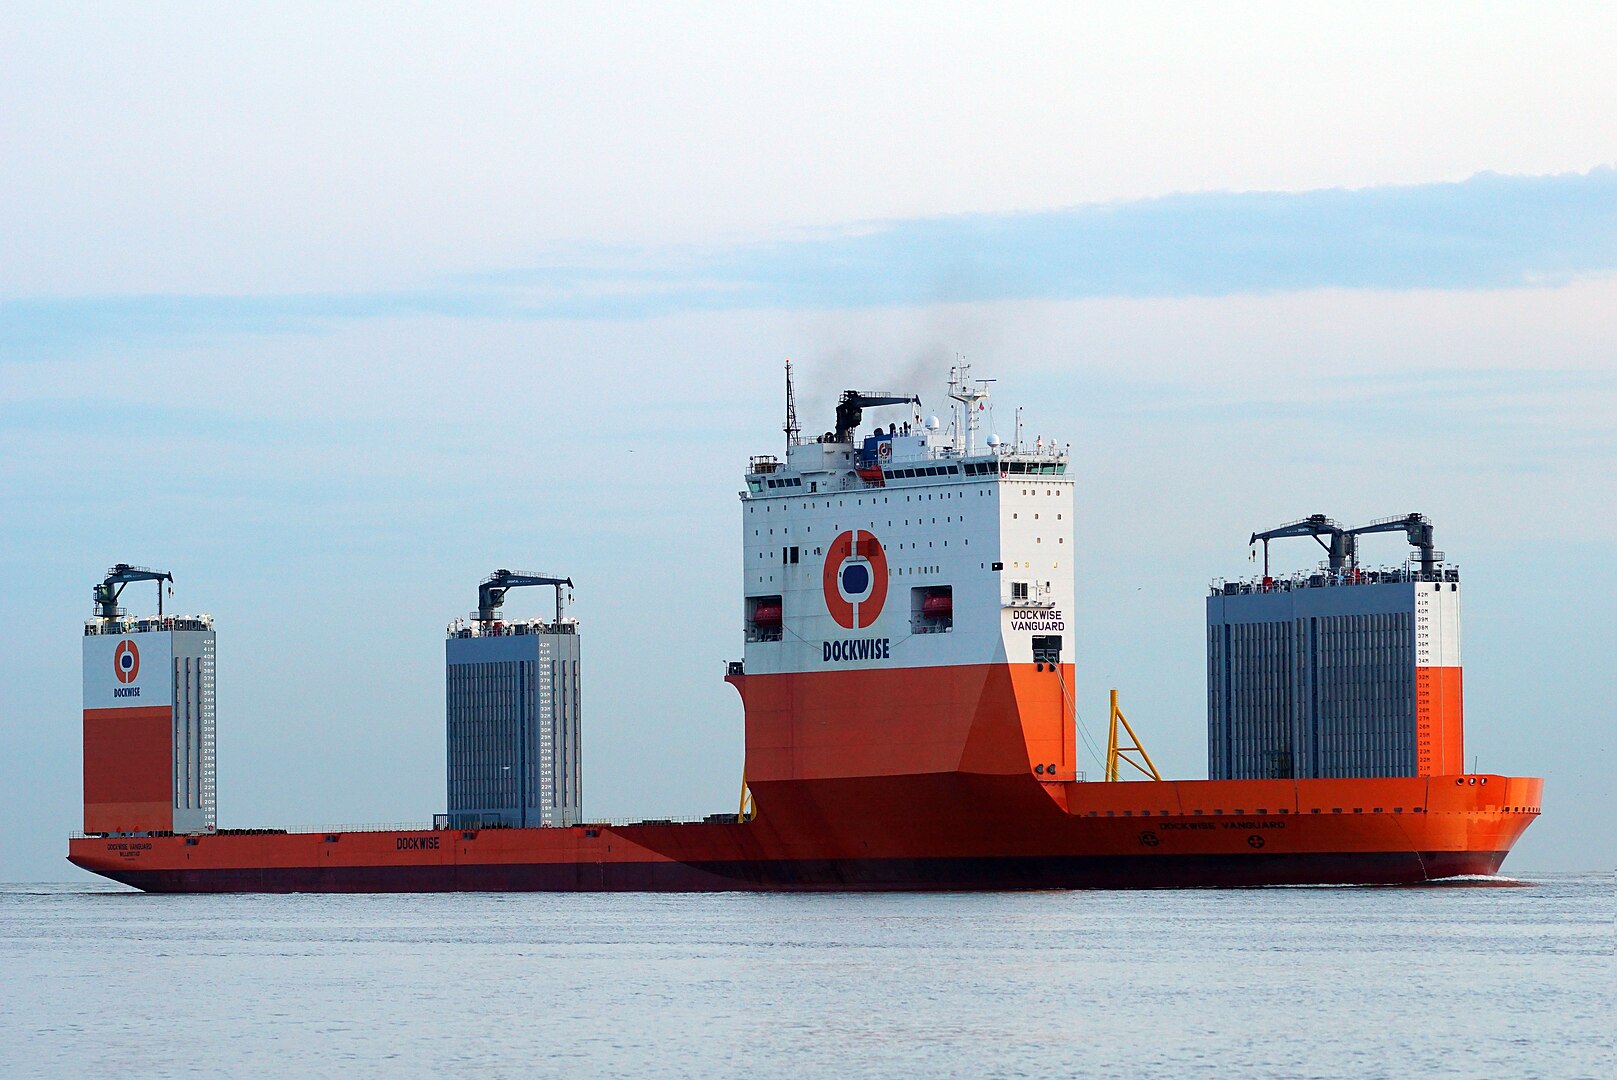 <p>The Dockwise Vanguard—also known as the BOKA Vanguard—is a semisubmersible heavy-lift ship, and is the largest vessel of its kind ever built. It’s like the biggest and baddest tow truck of the sea.</p>